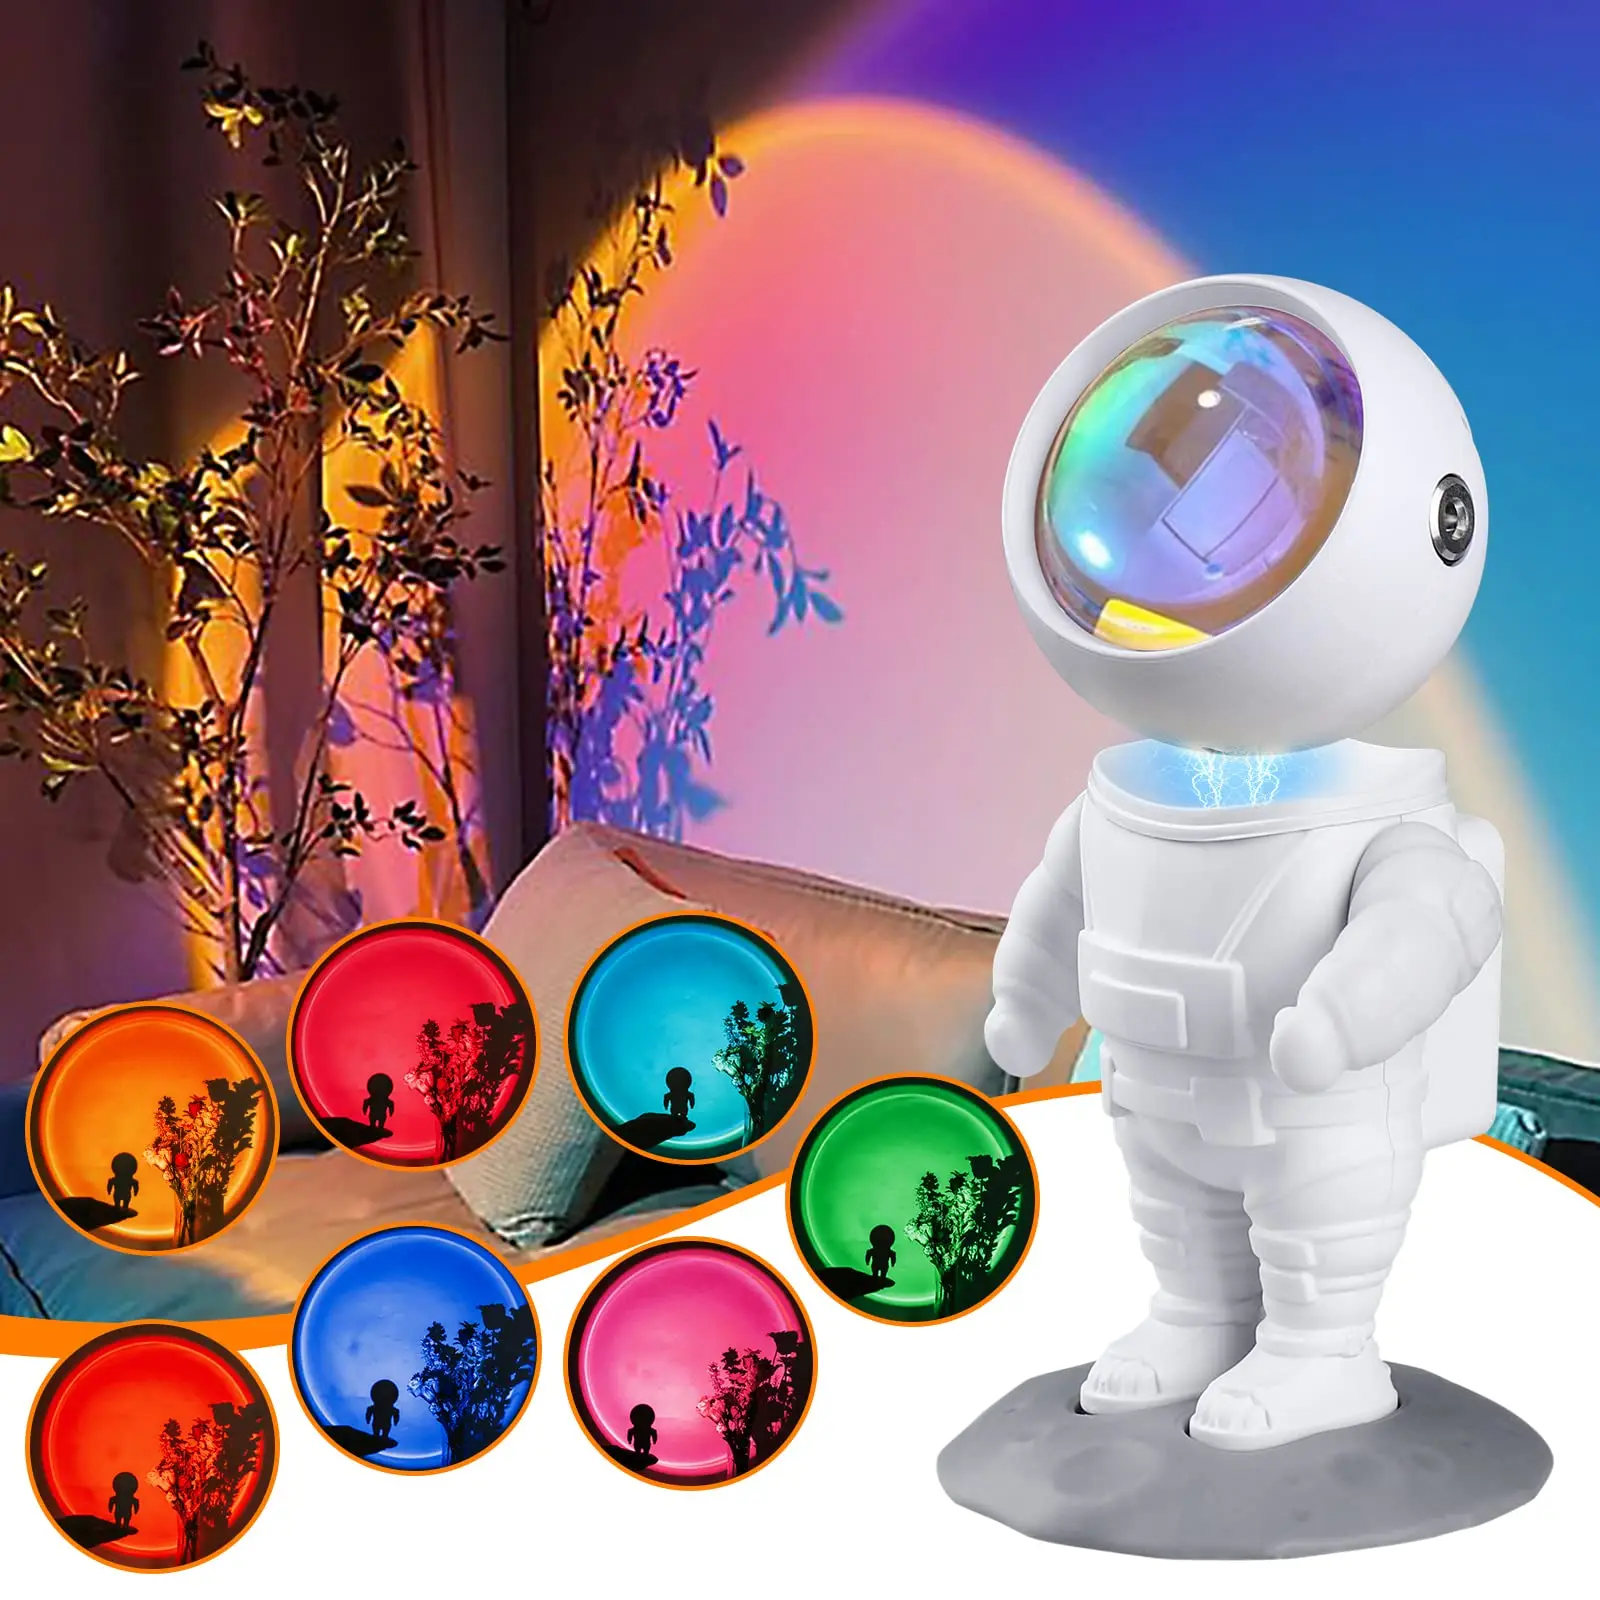 

Astronaut Sunset Lamp Projector Light 7 Colors Mode Battery Lights 360° Rotating Head Cosmonaut Lamp for Photography Bedroom Gif